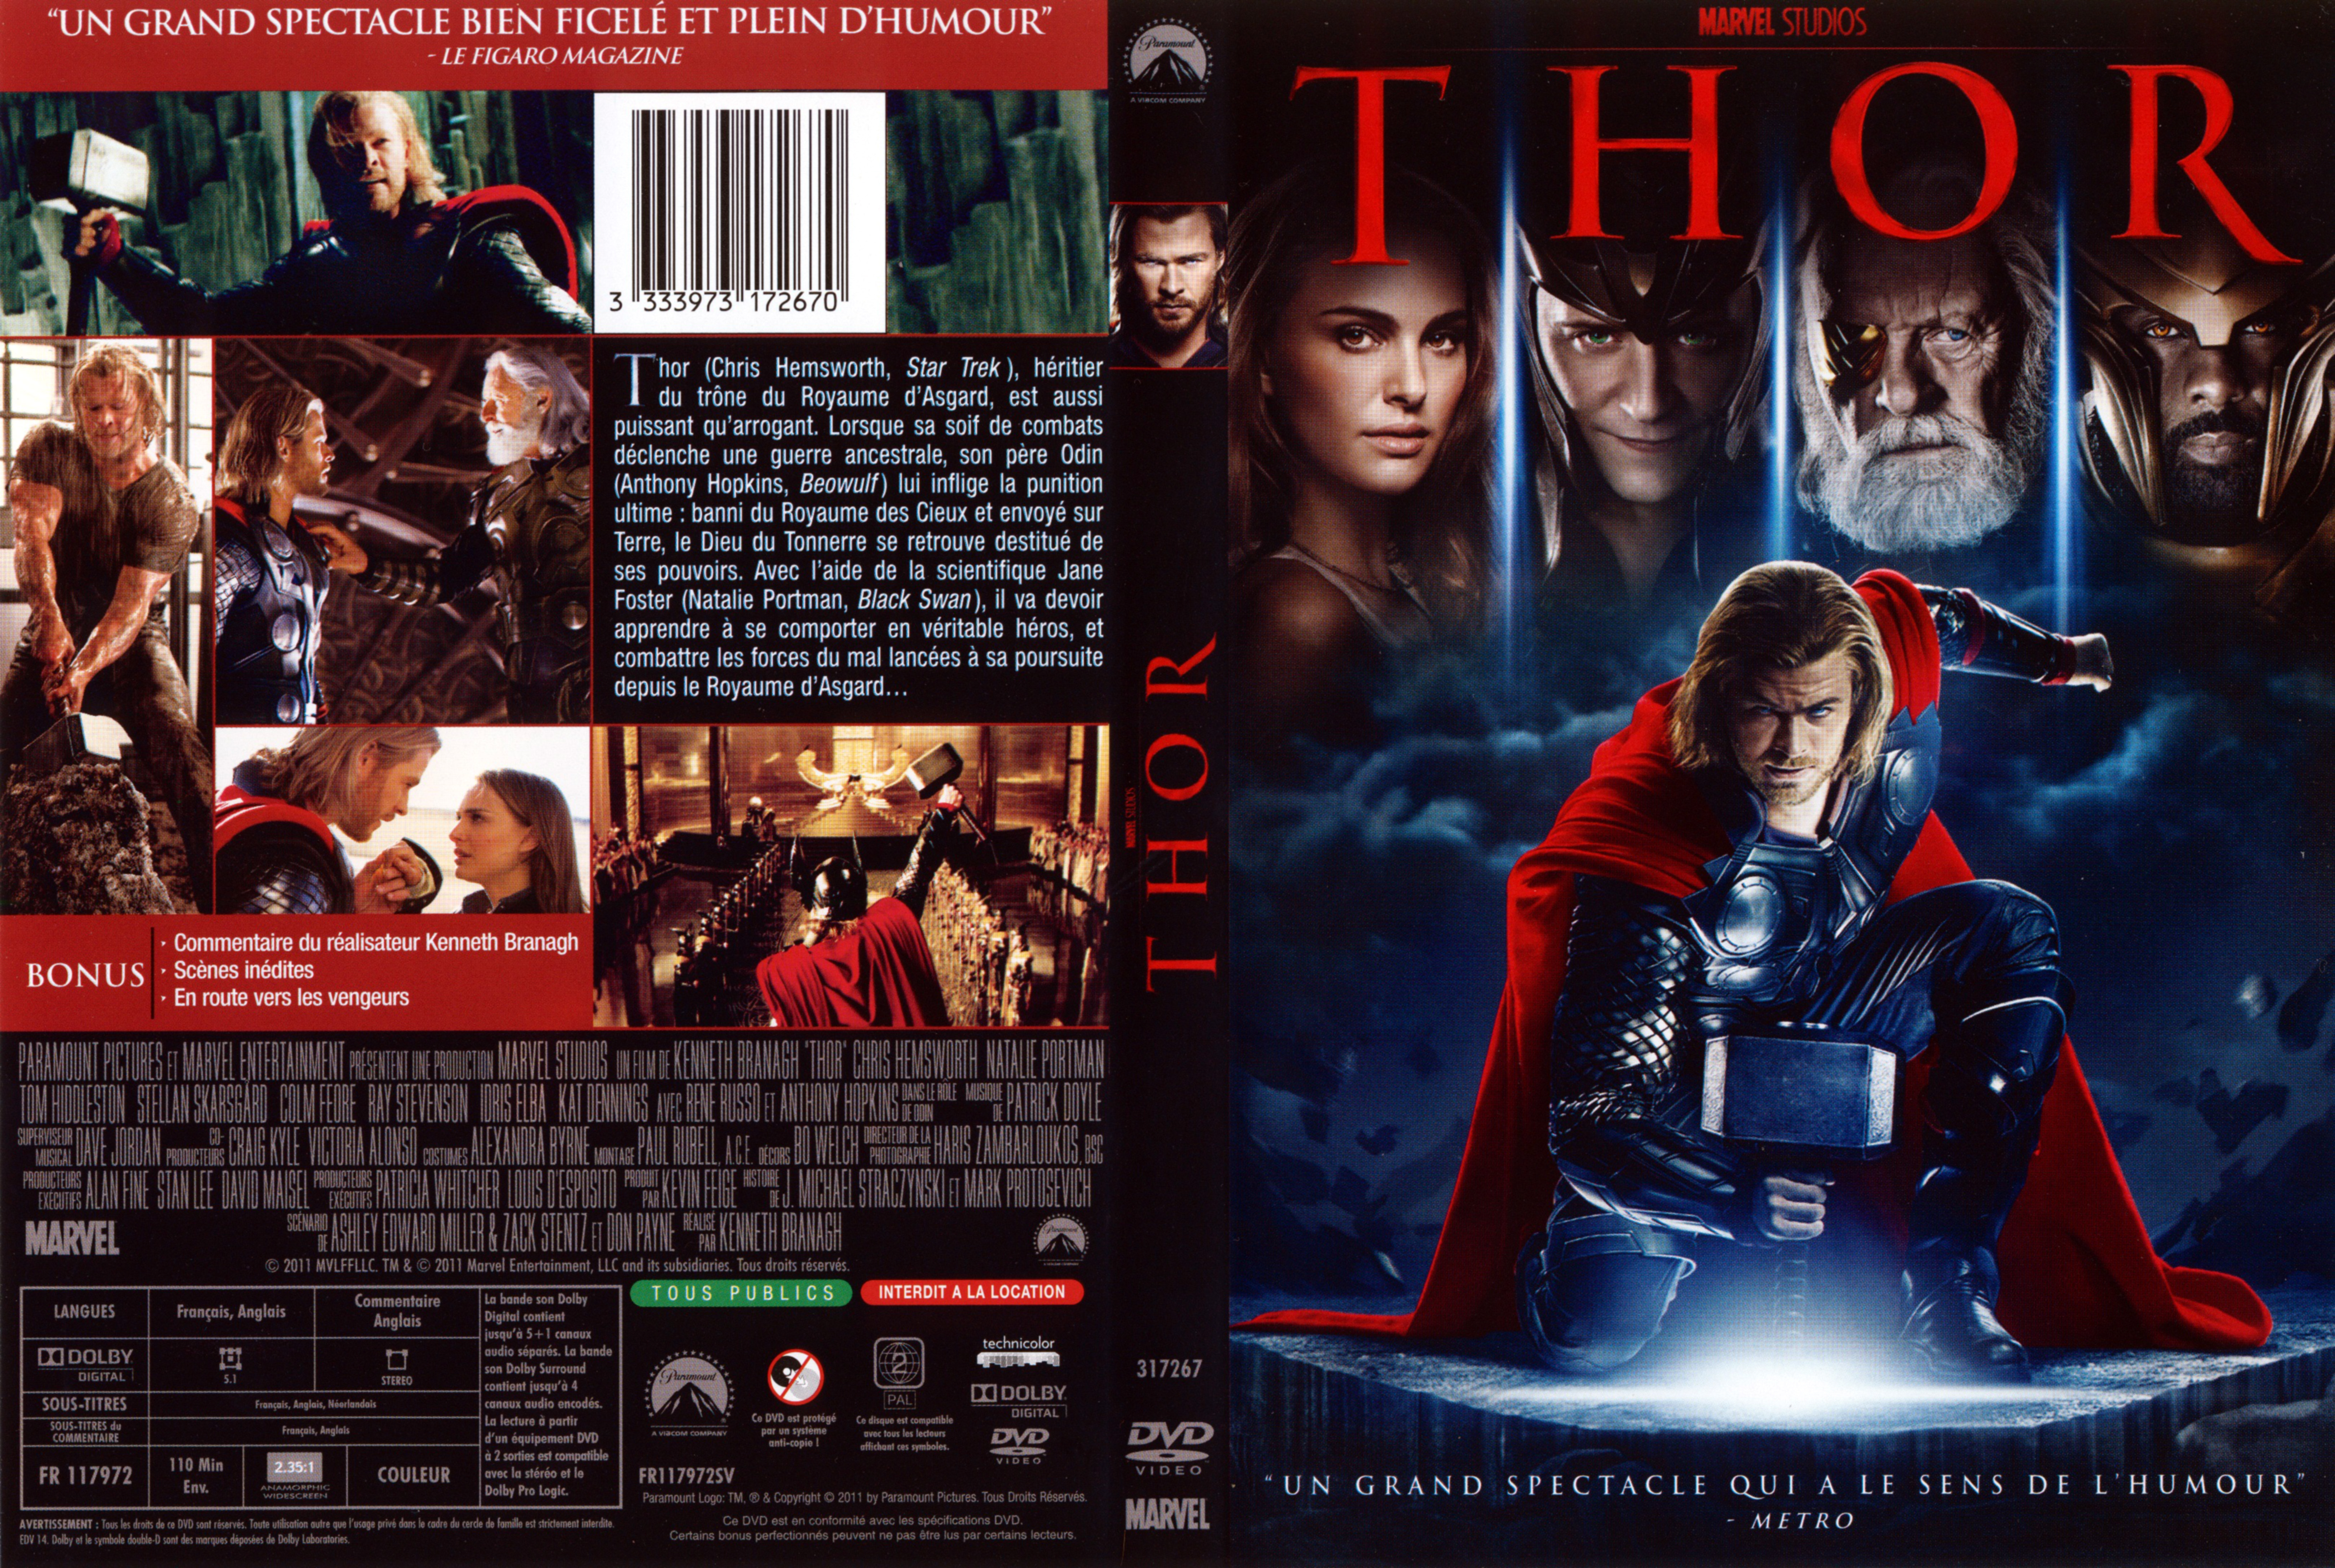 Jaquette DVD Thor